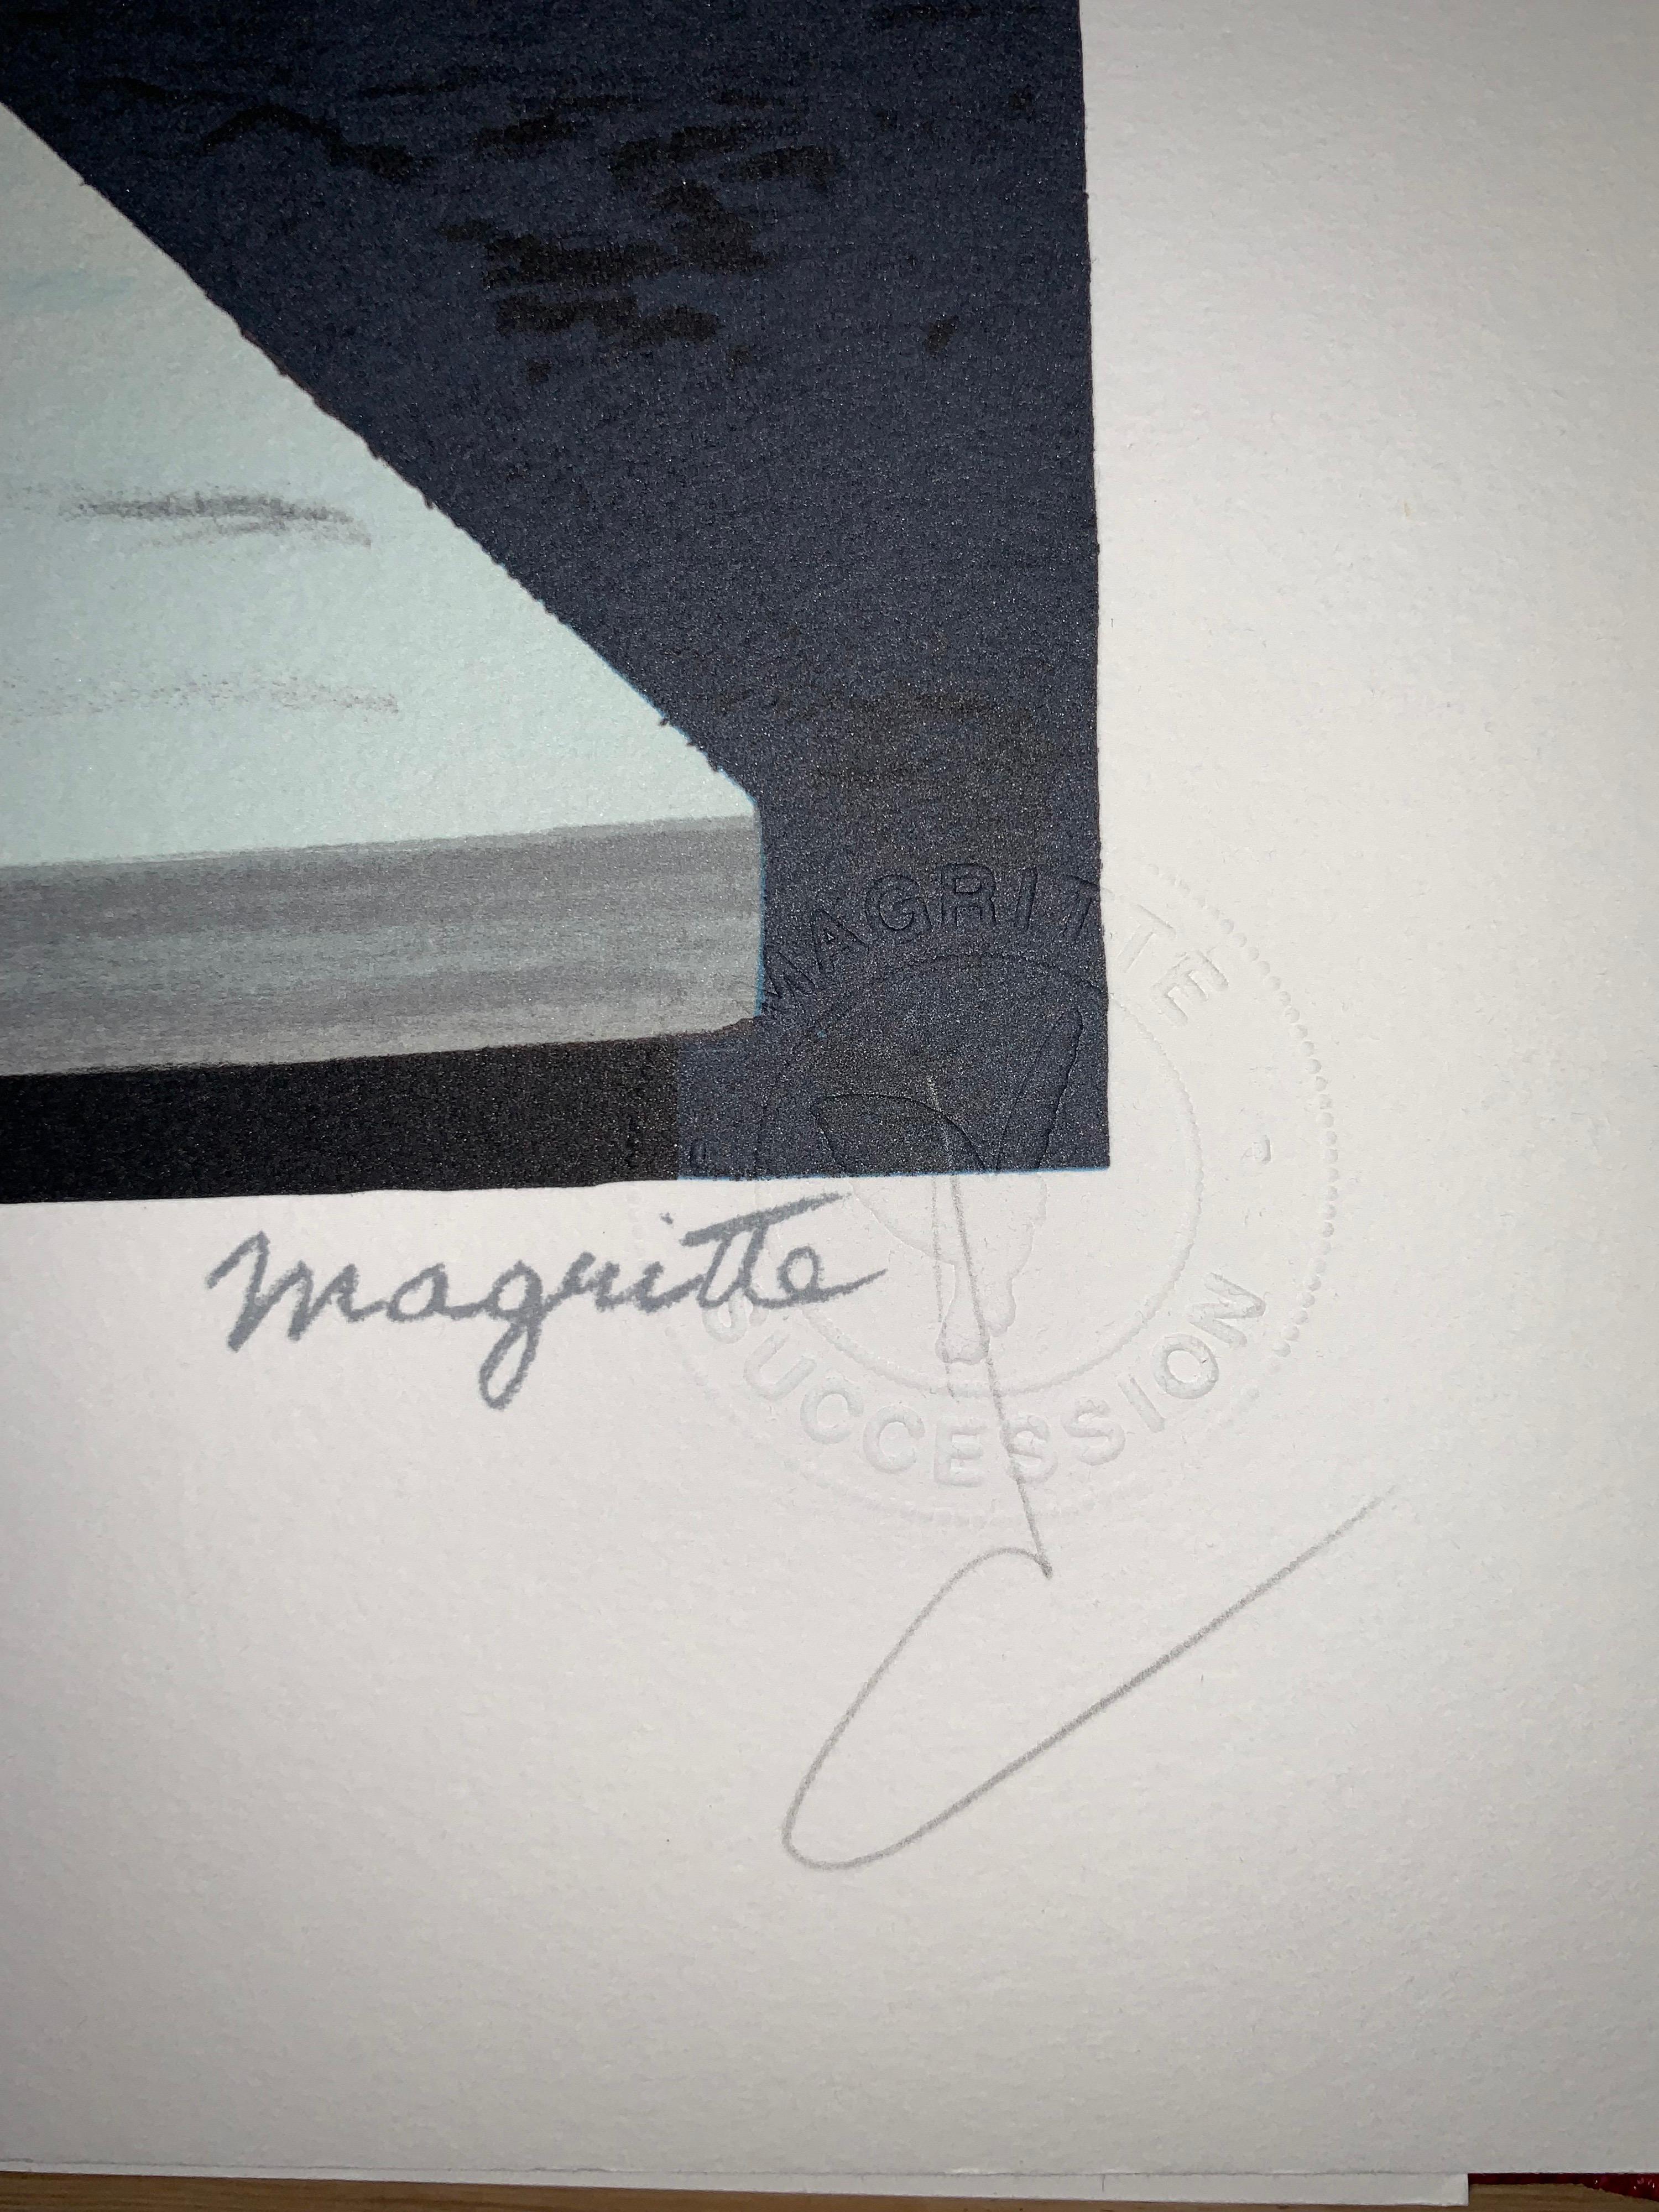 Color lithograph after the 1960 oil on canvas by René Magritte, printed signature of Magritte and numbered from the edition of 275. 
The lithograph features the dry stamps of the Magritte Foundation & ADAGP and is countersigned in pencil by Mr.